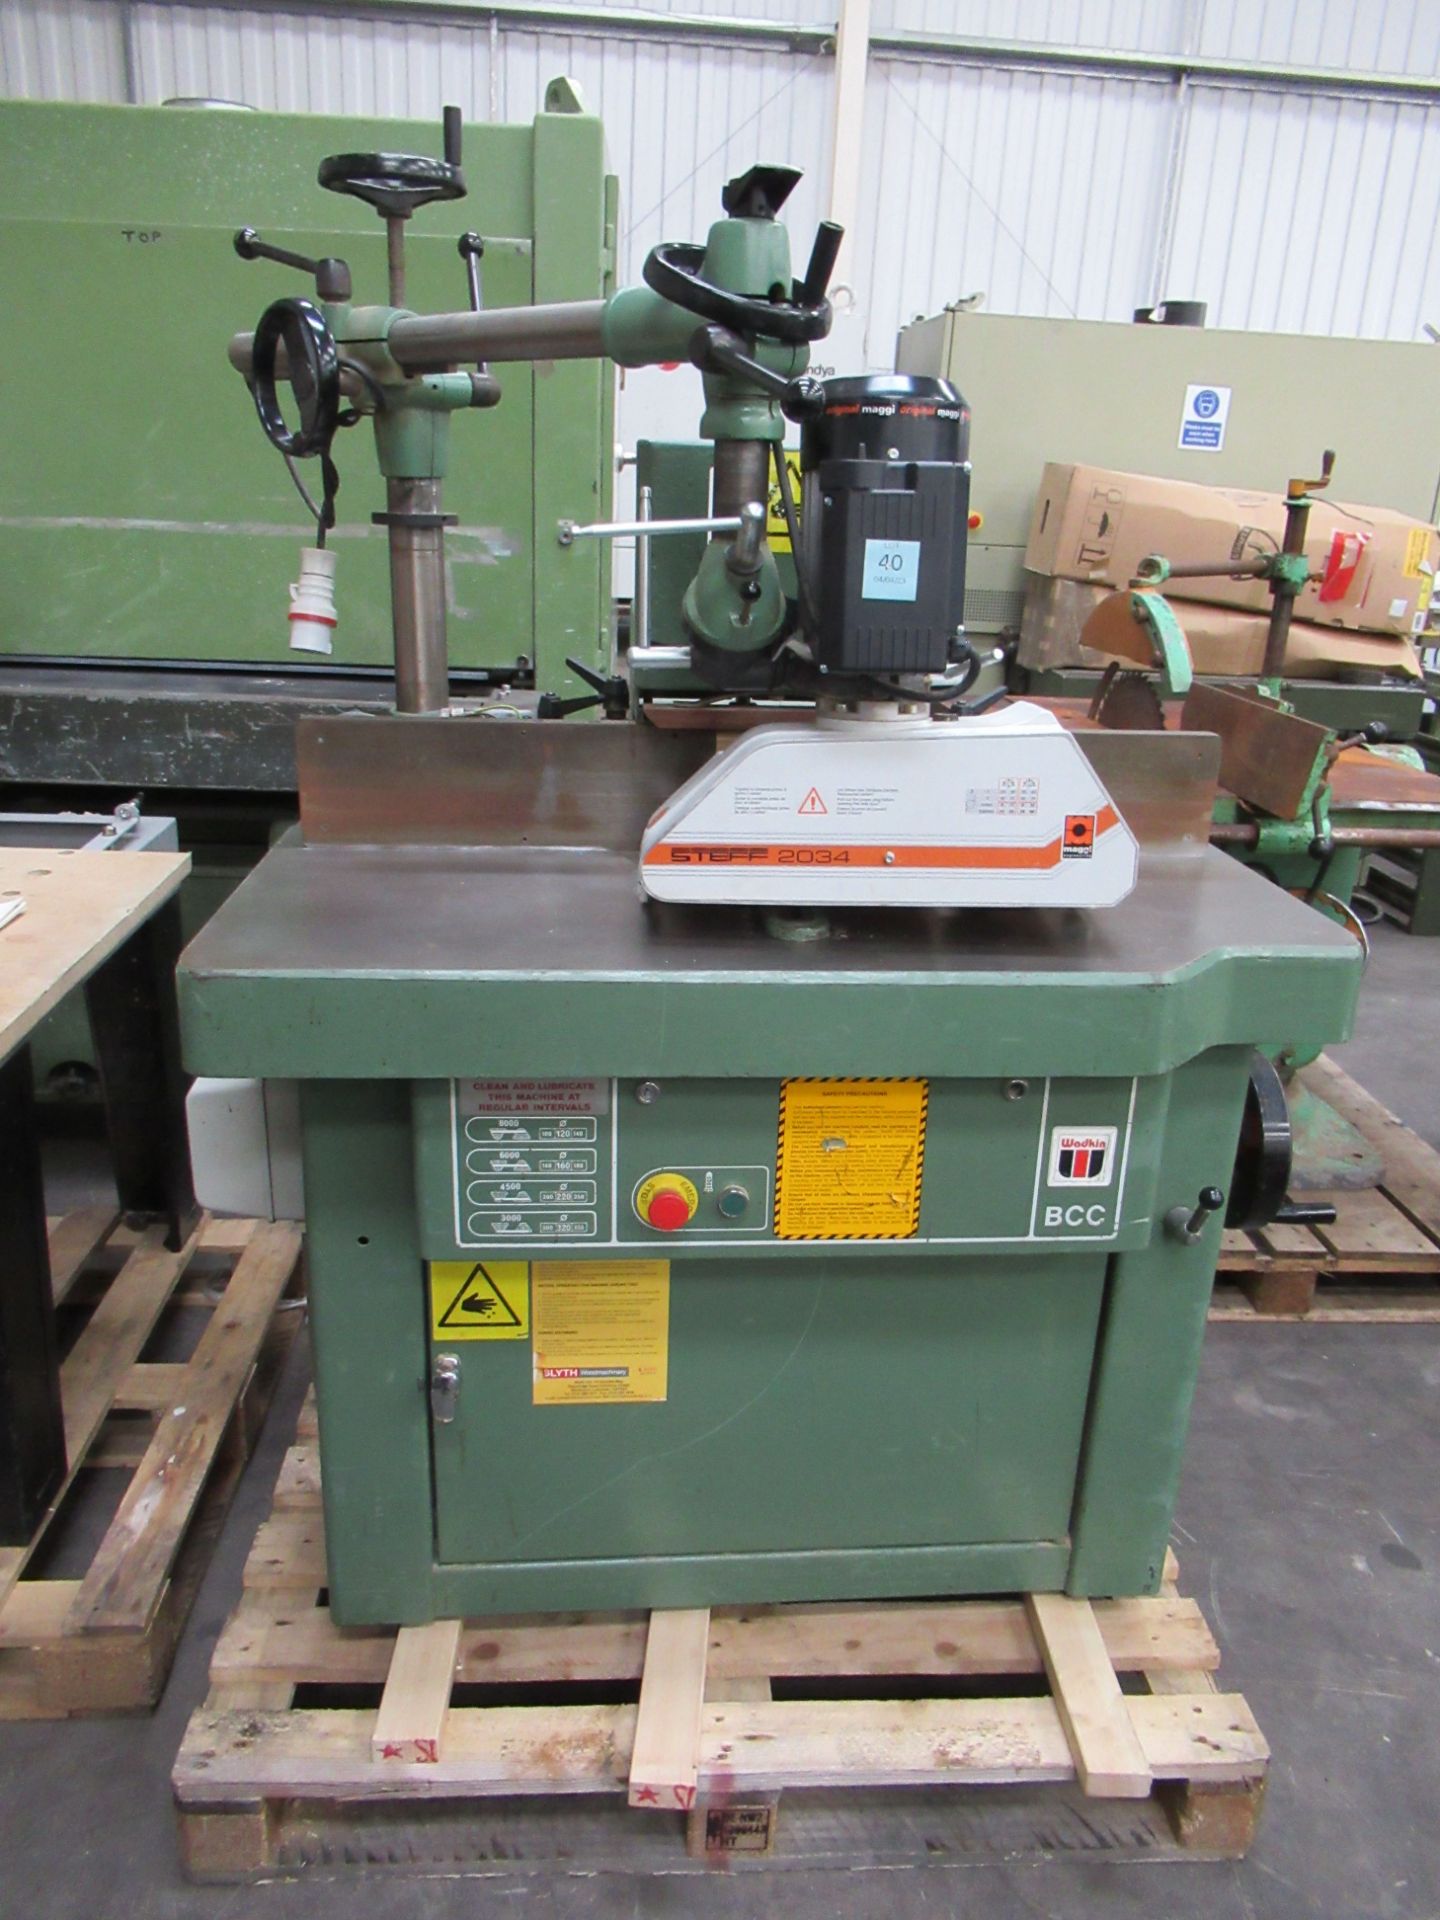 Wadkin BCC Spindle Moulder with Maggi Steff 2034 Powered Roller Feed - 3ph